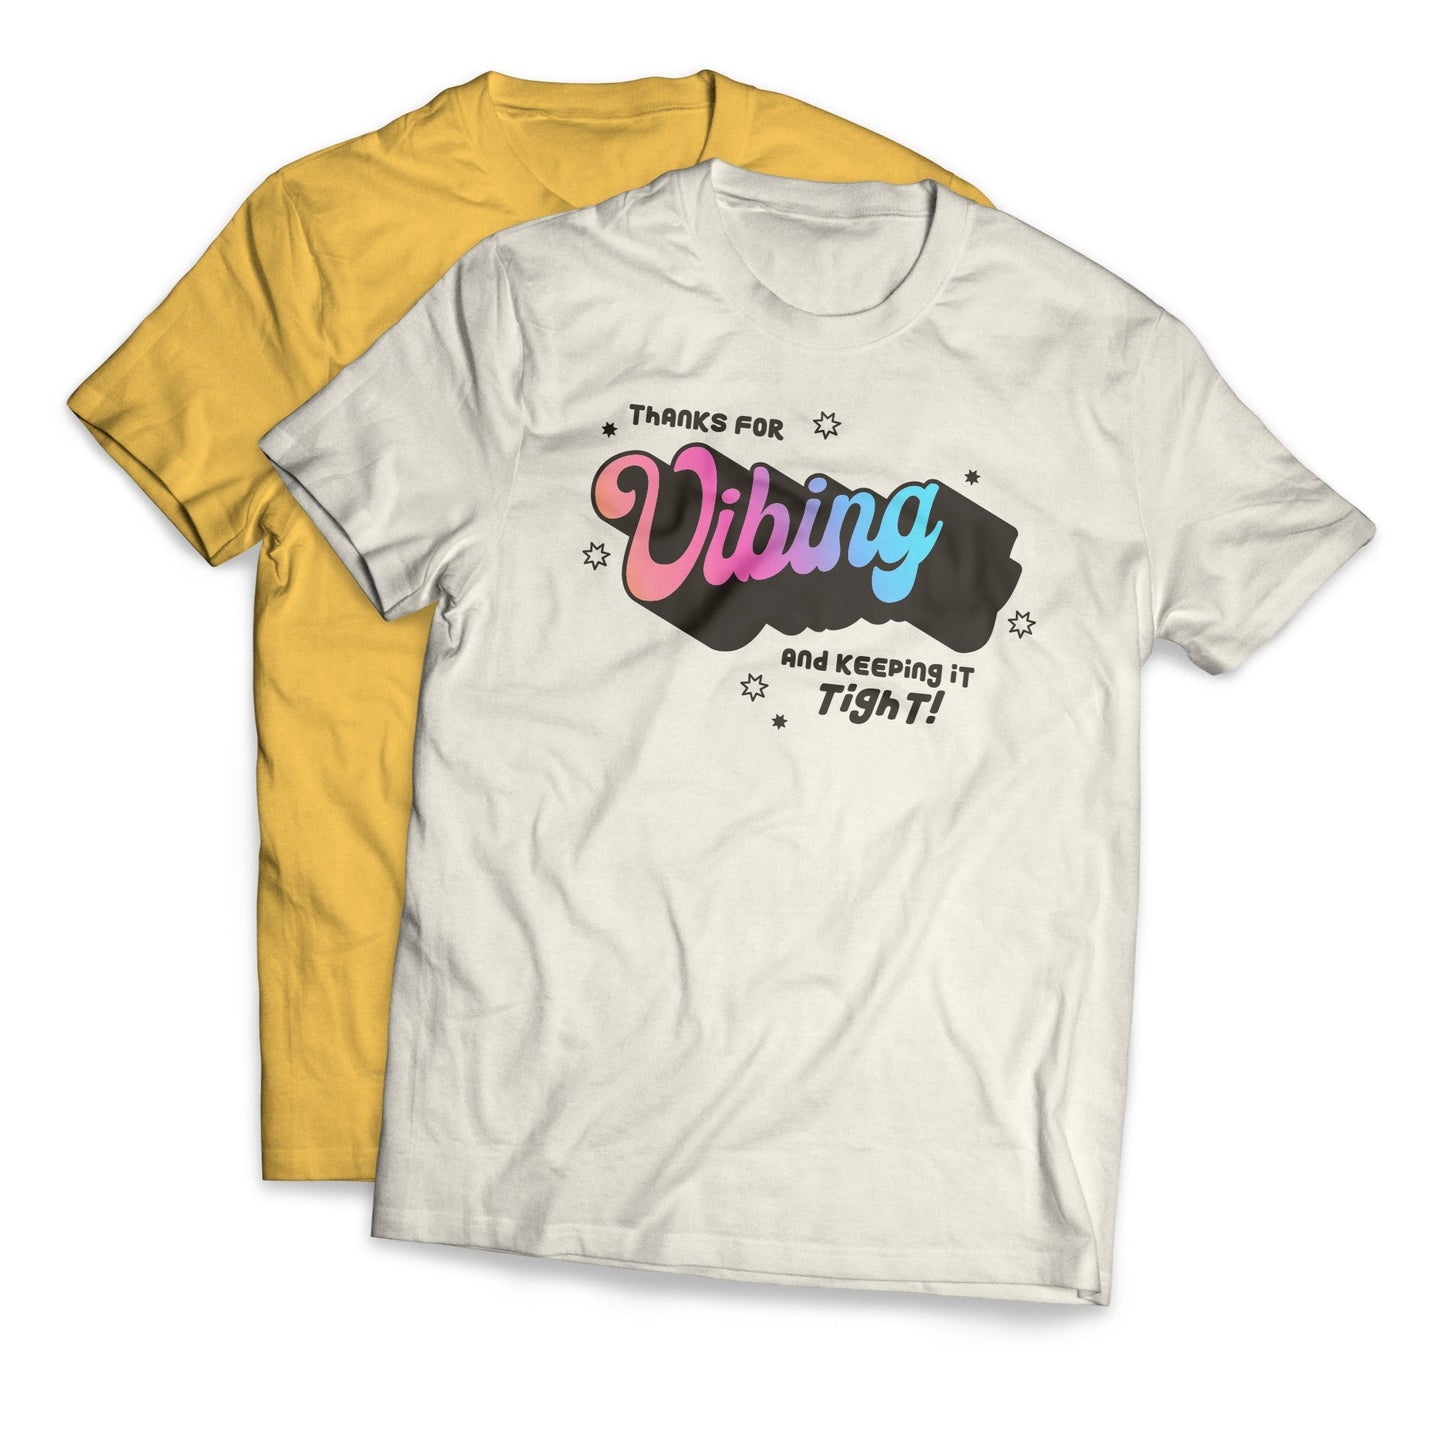 Two shirts that say “Thanks for vibing and keeping it tight!” The “vibing” is a pastel gradient in a larger, retro handwritten font. The shirt in the back is a gold color and the shirt in the front is a cream color.